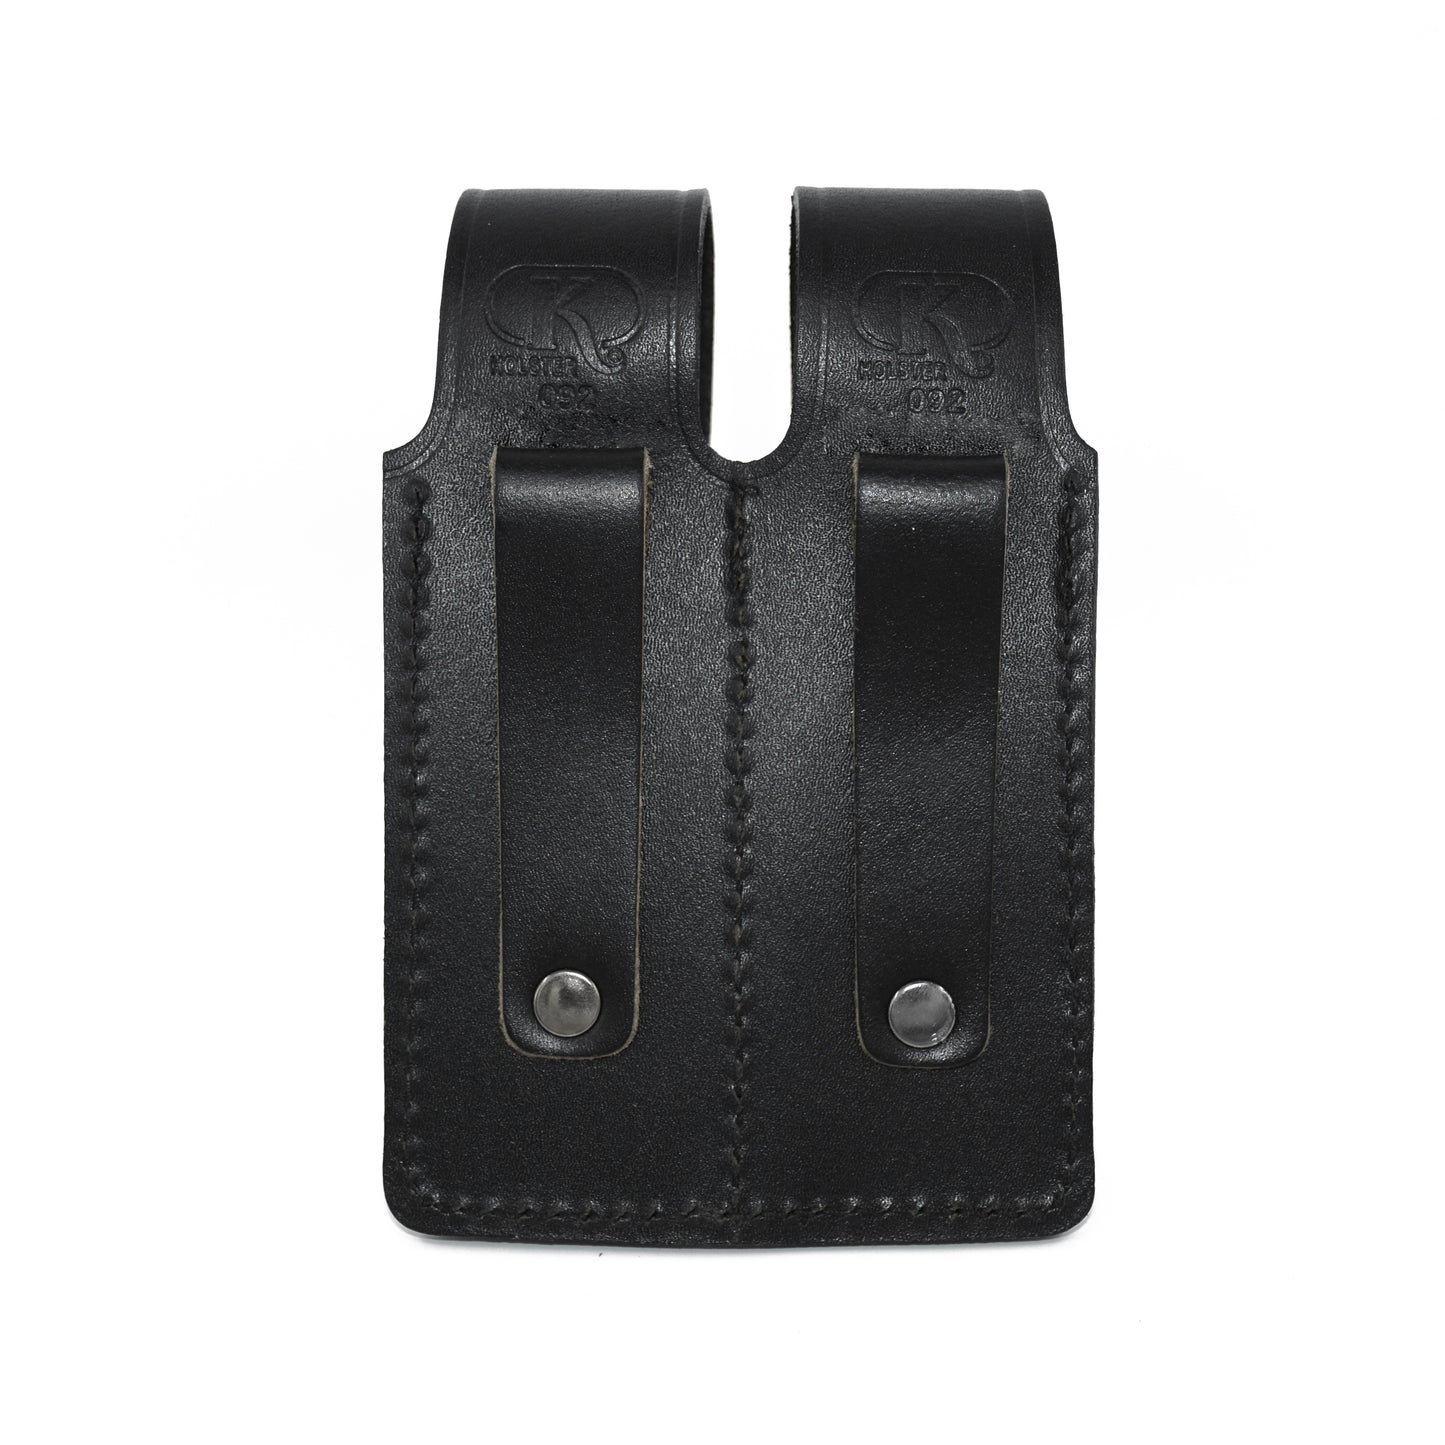 Holster K092 Leather Double Magazine Pouch/Carrier/case for Glock 17 19 22 23 Handmade!